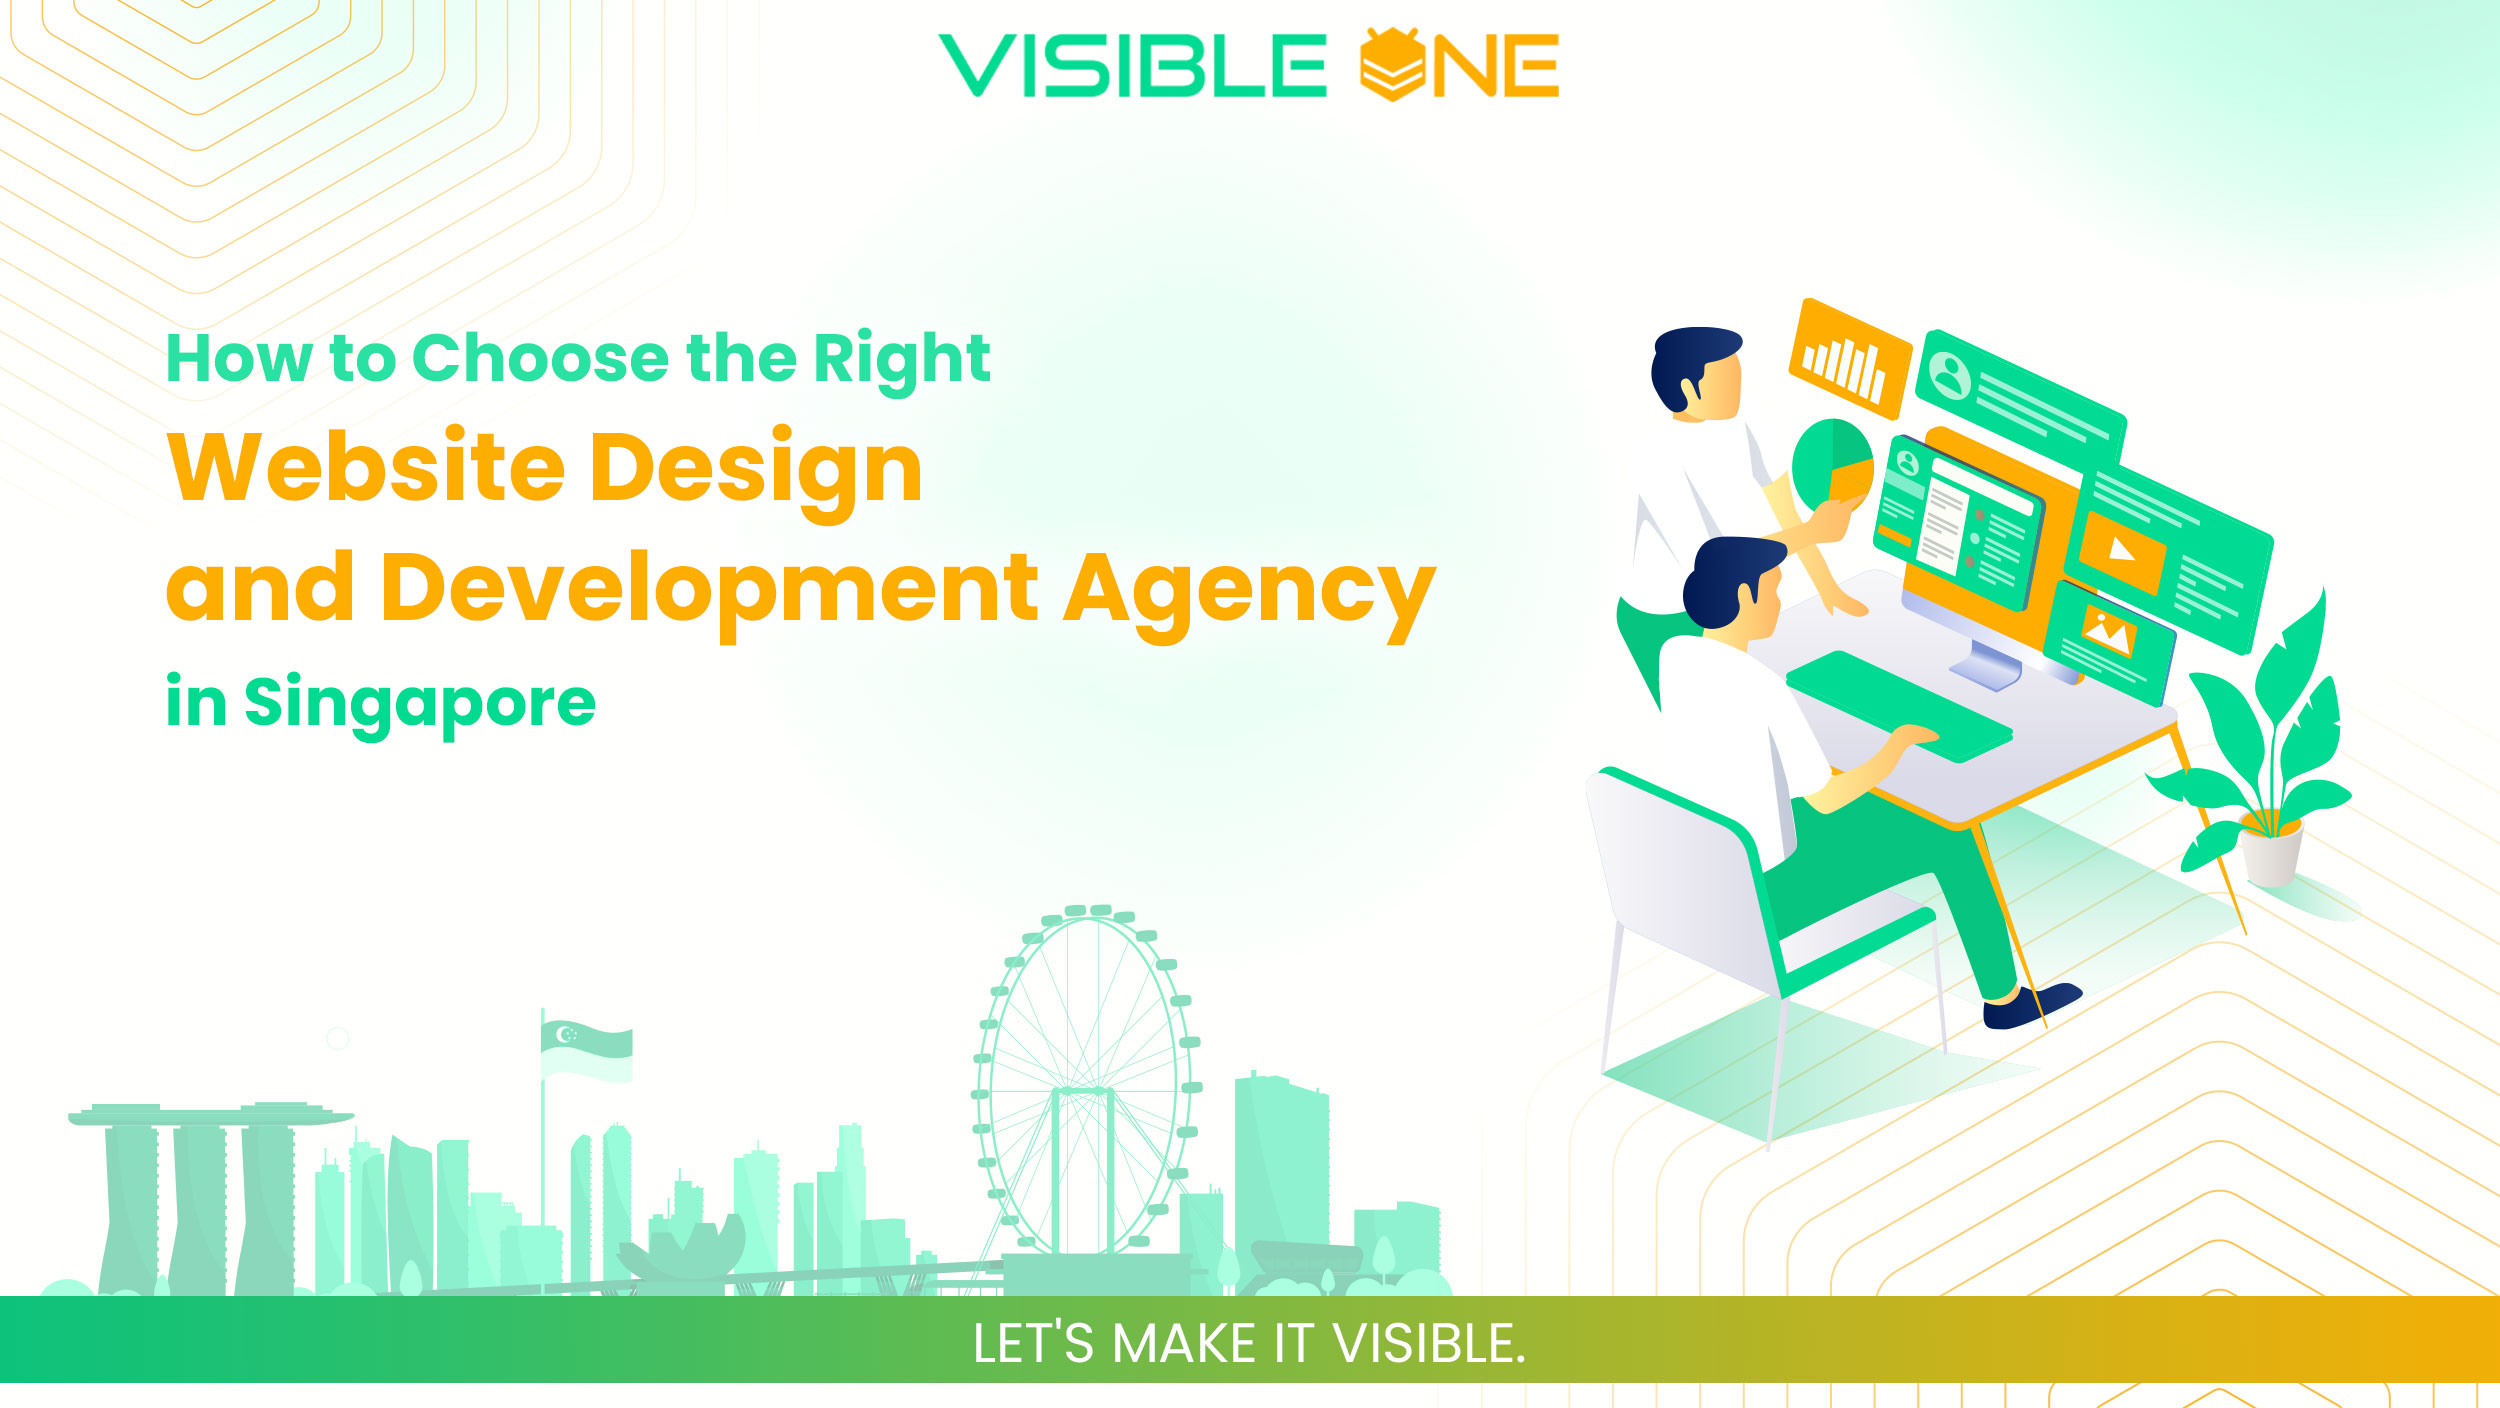 How to Choose the Right Website Design and Development Agency in Singapore